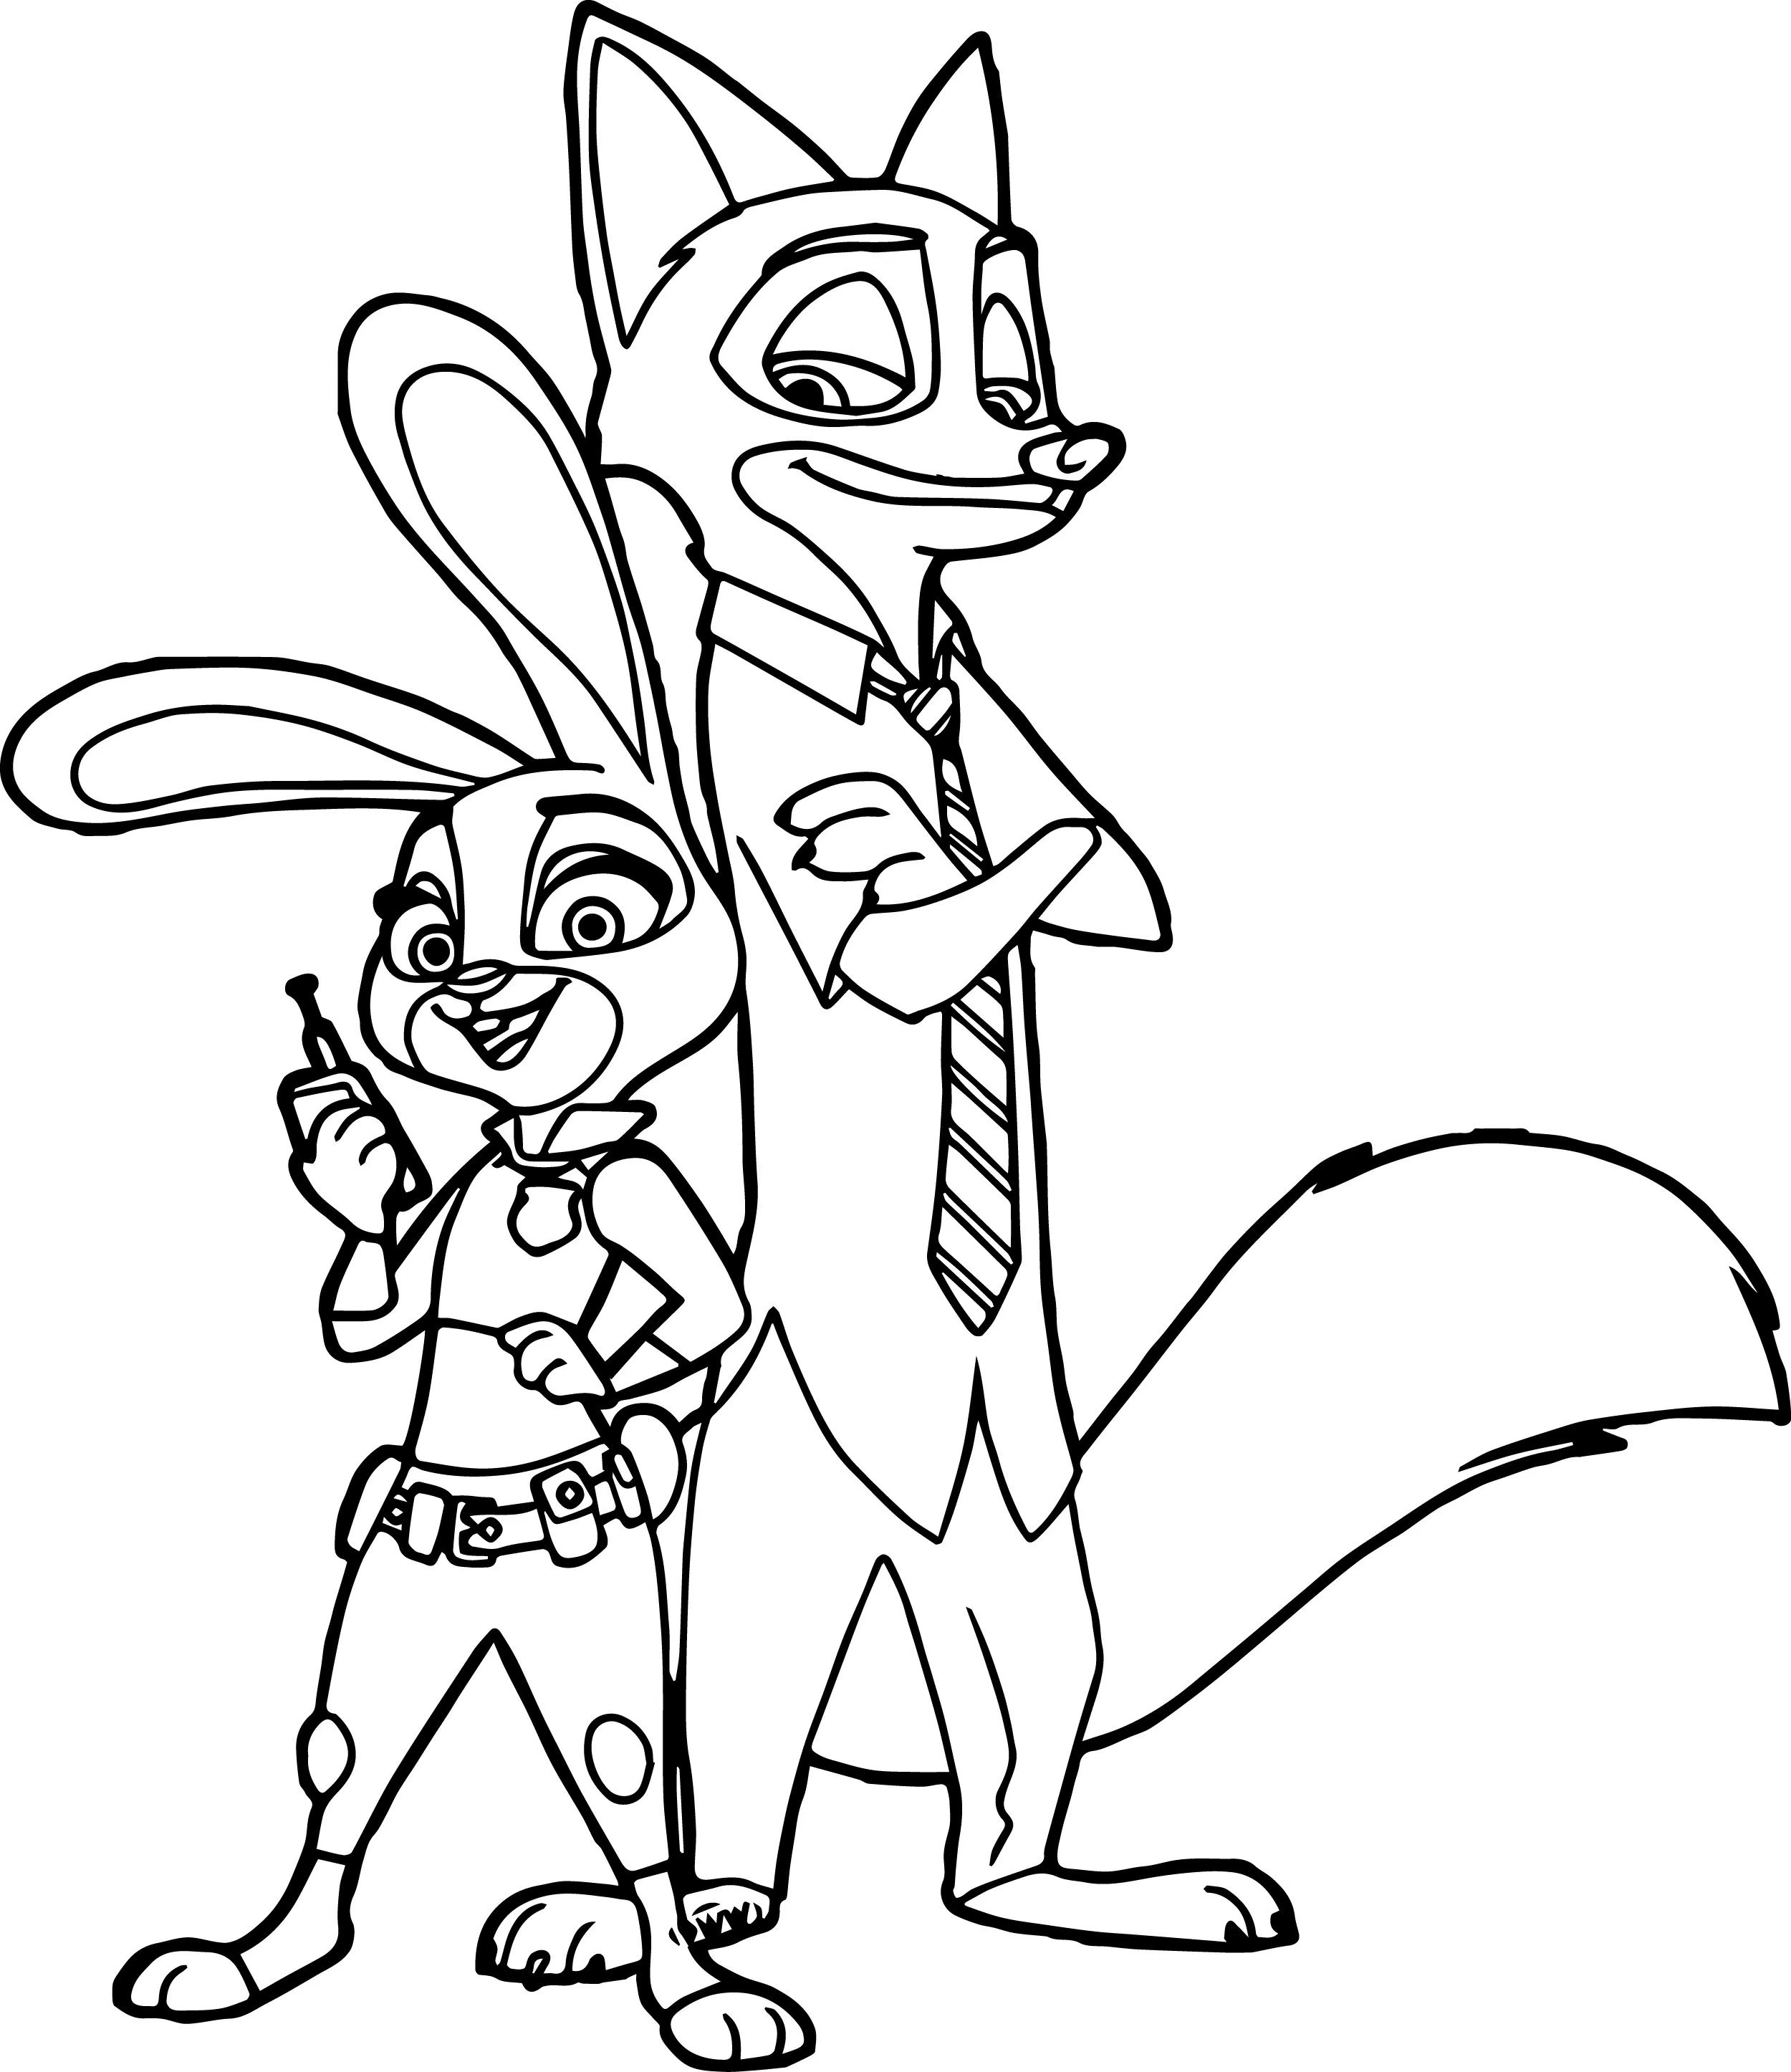 Zootopia Coloring Pages Free at GetDrawings | Free download